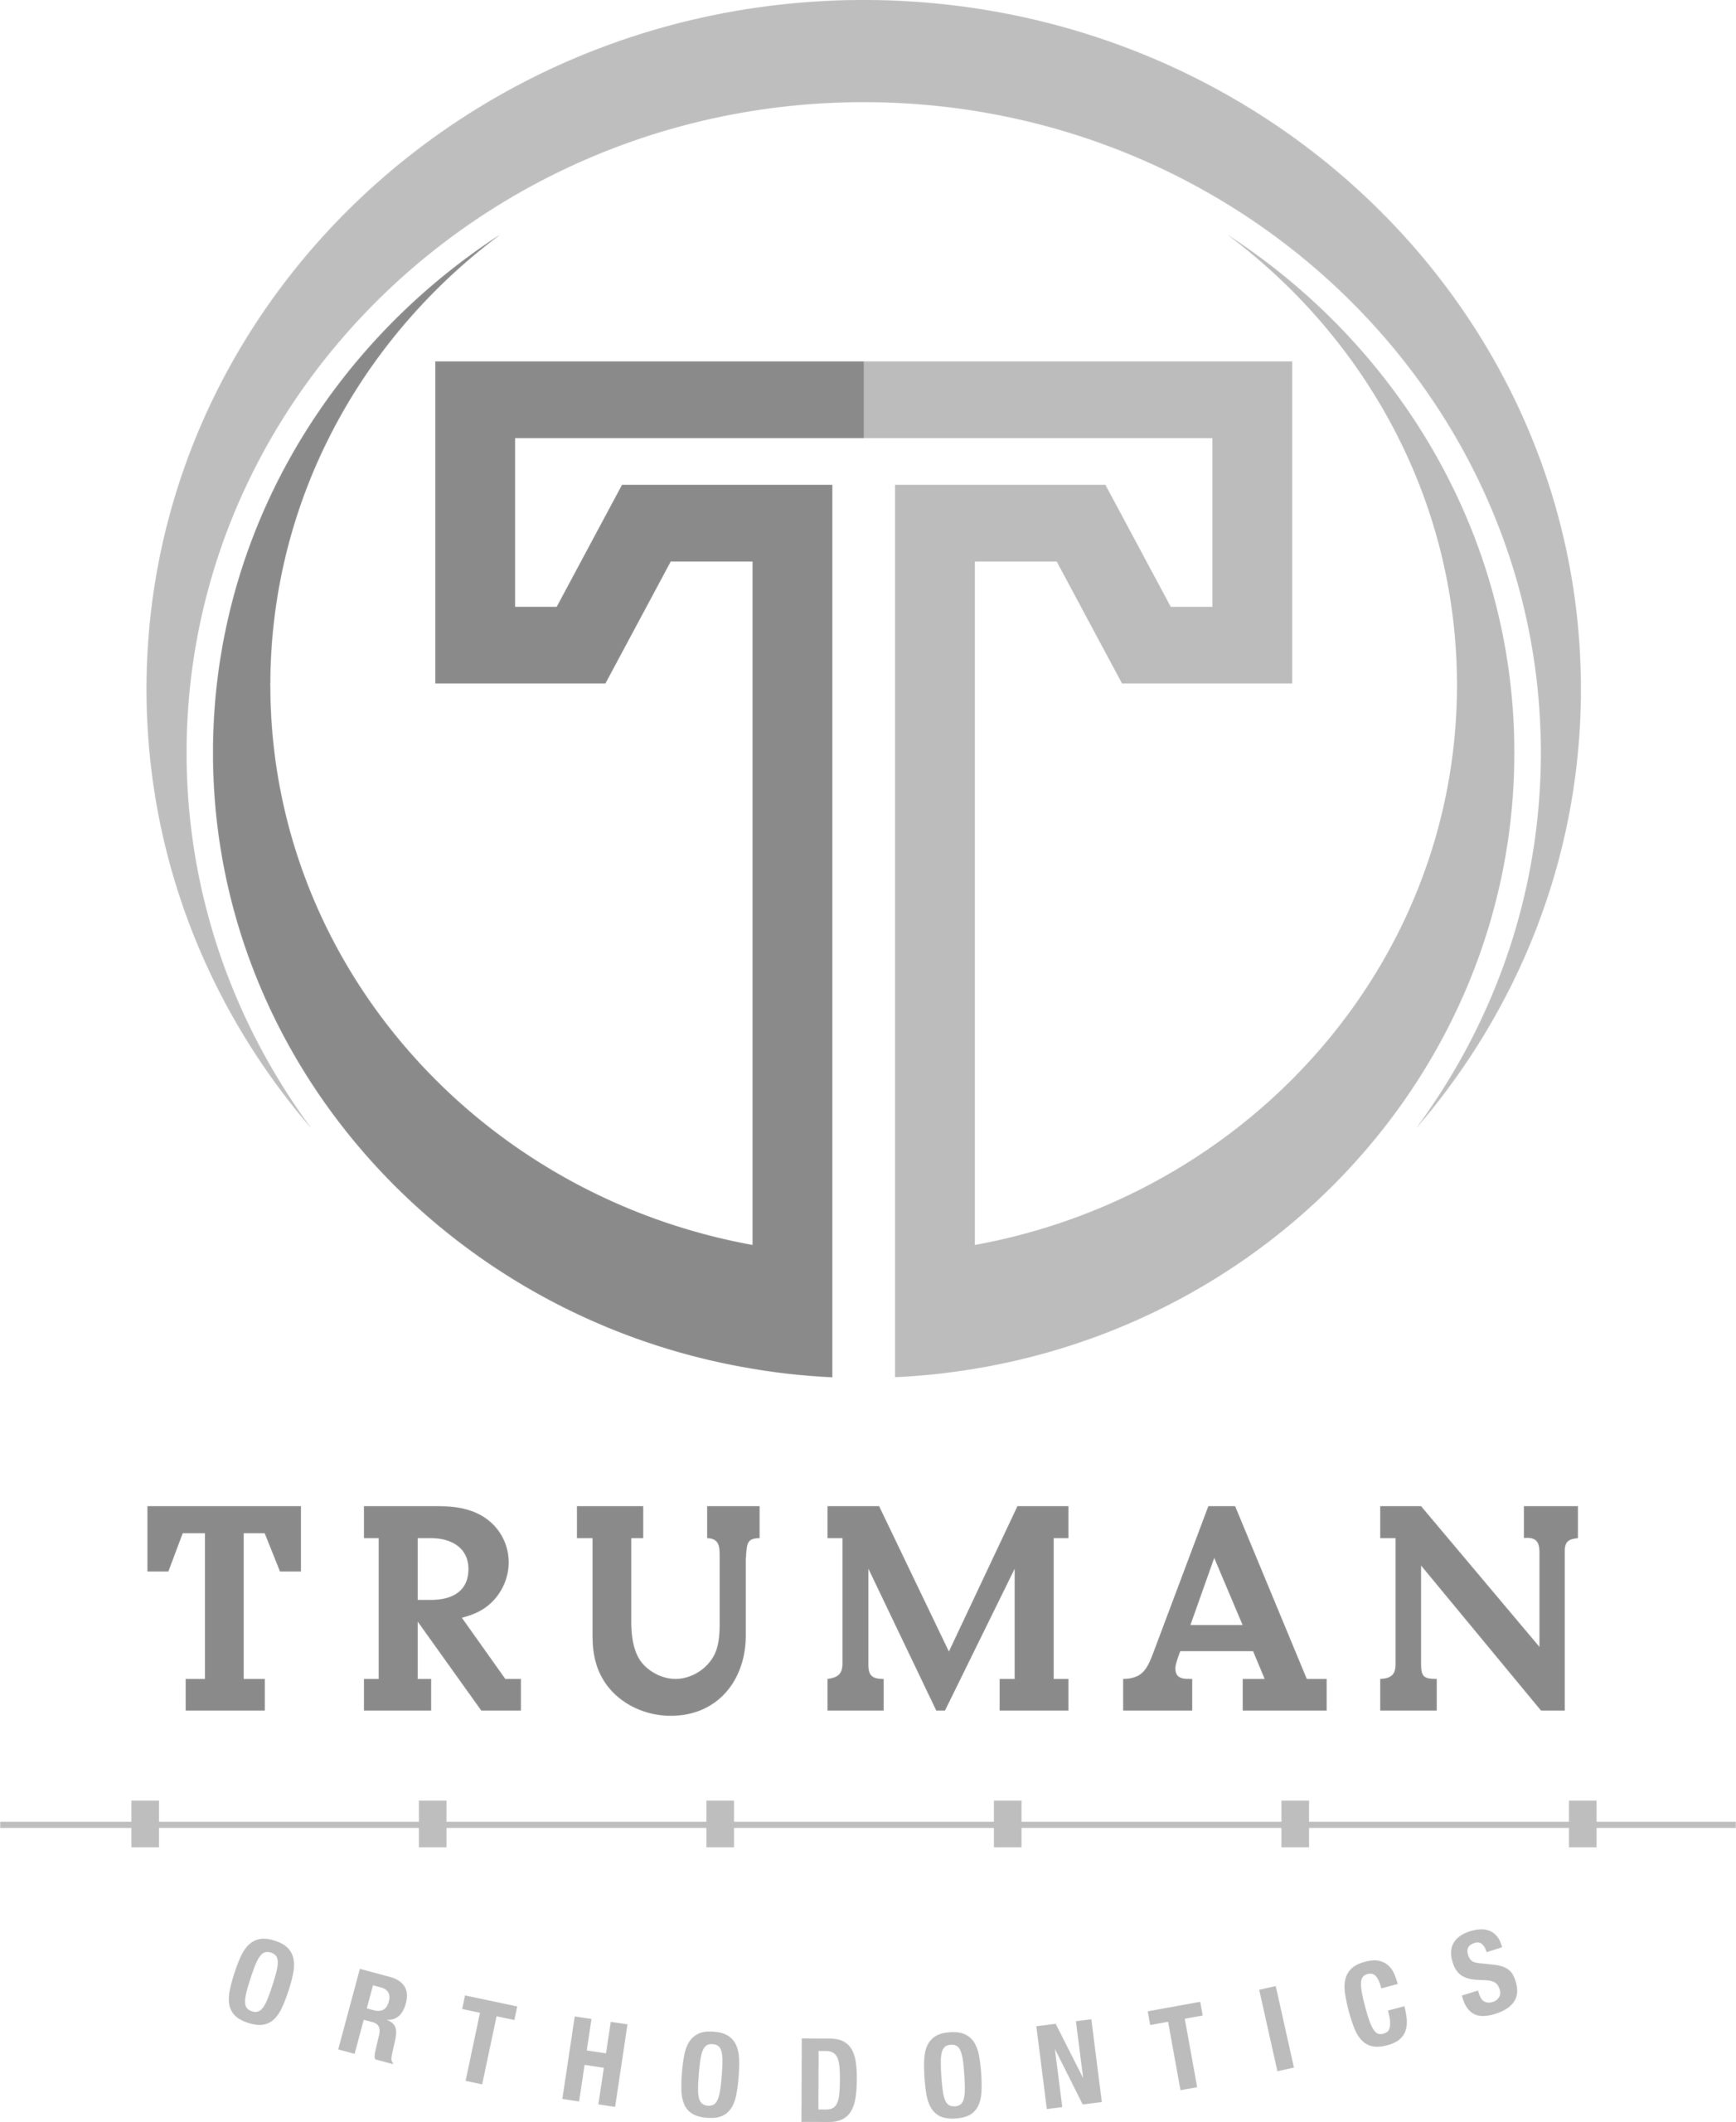 https://www.pirateslacrosse.org/wp-content/uploads/sites/2437/2021/01/Truman-Grayscale-scaled.jpg